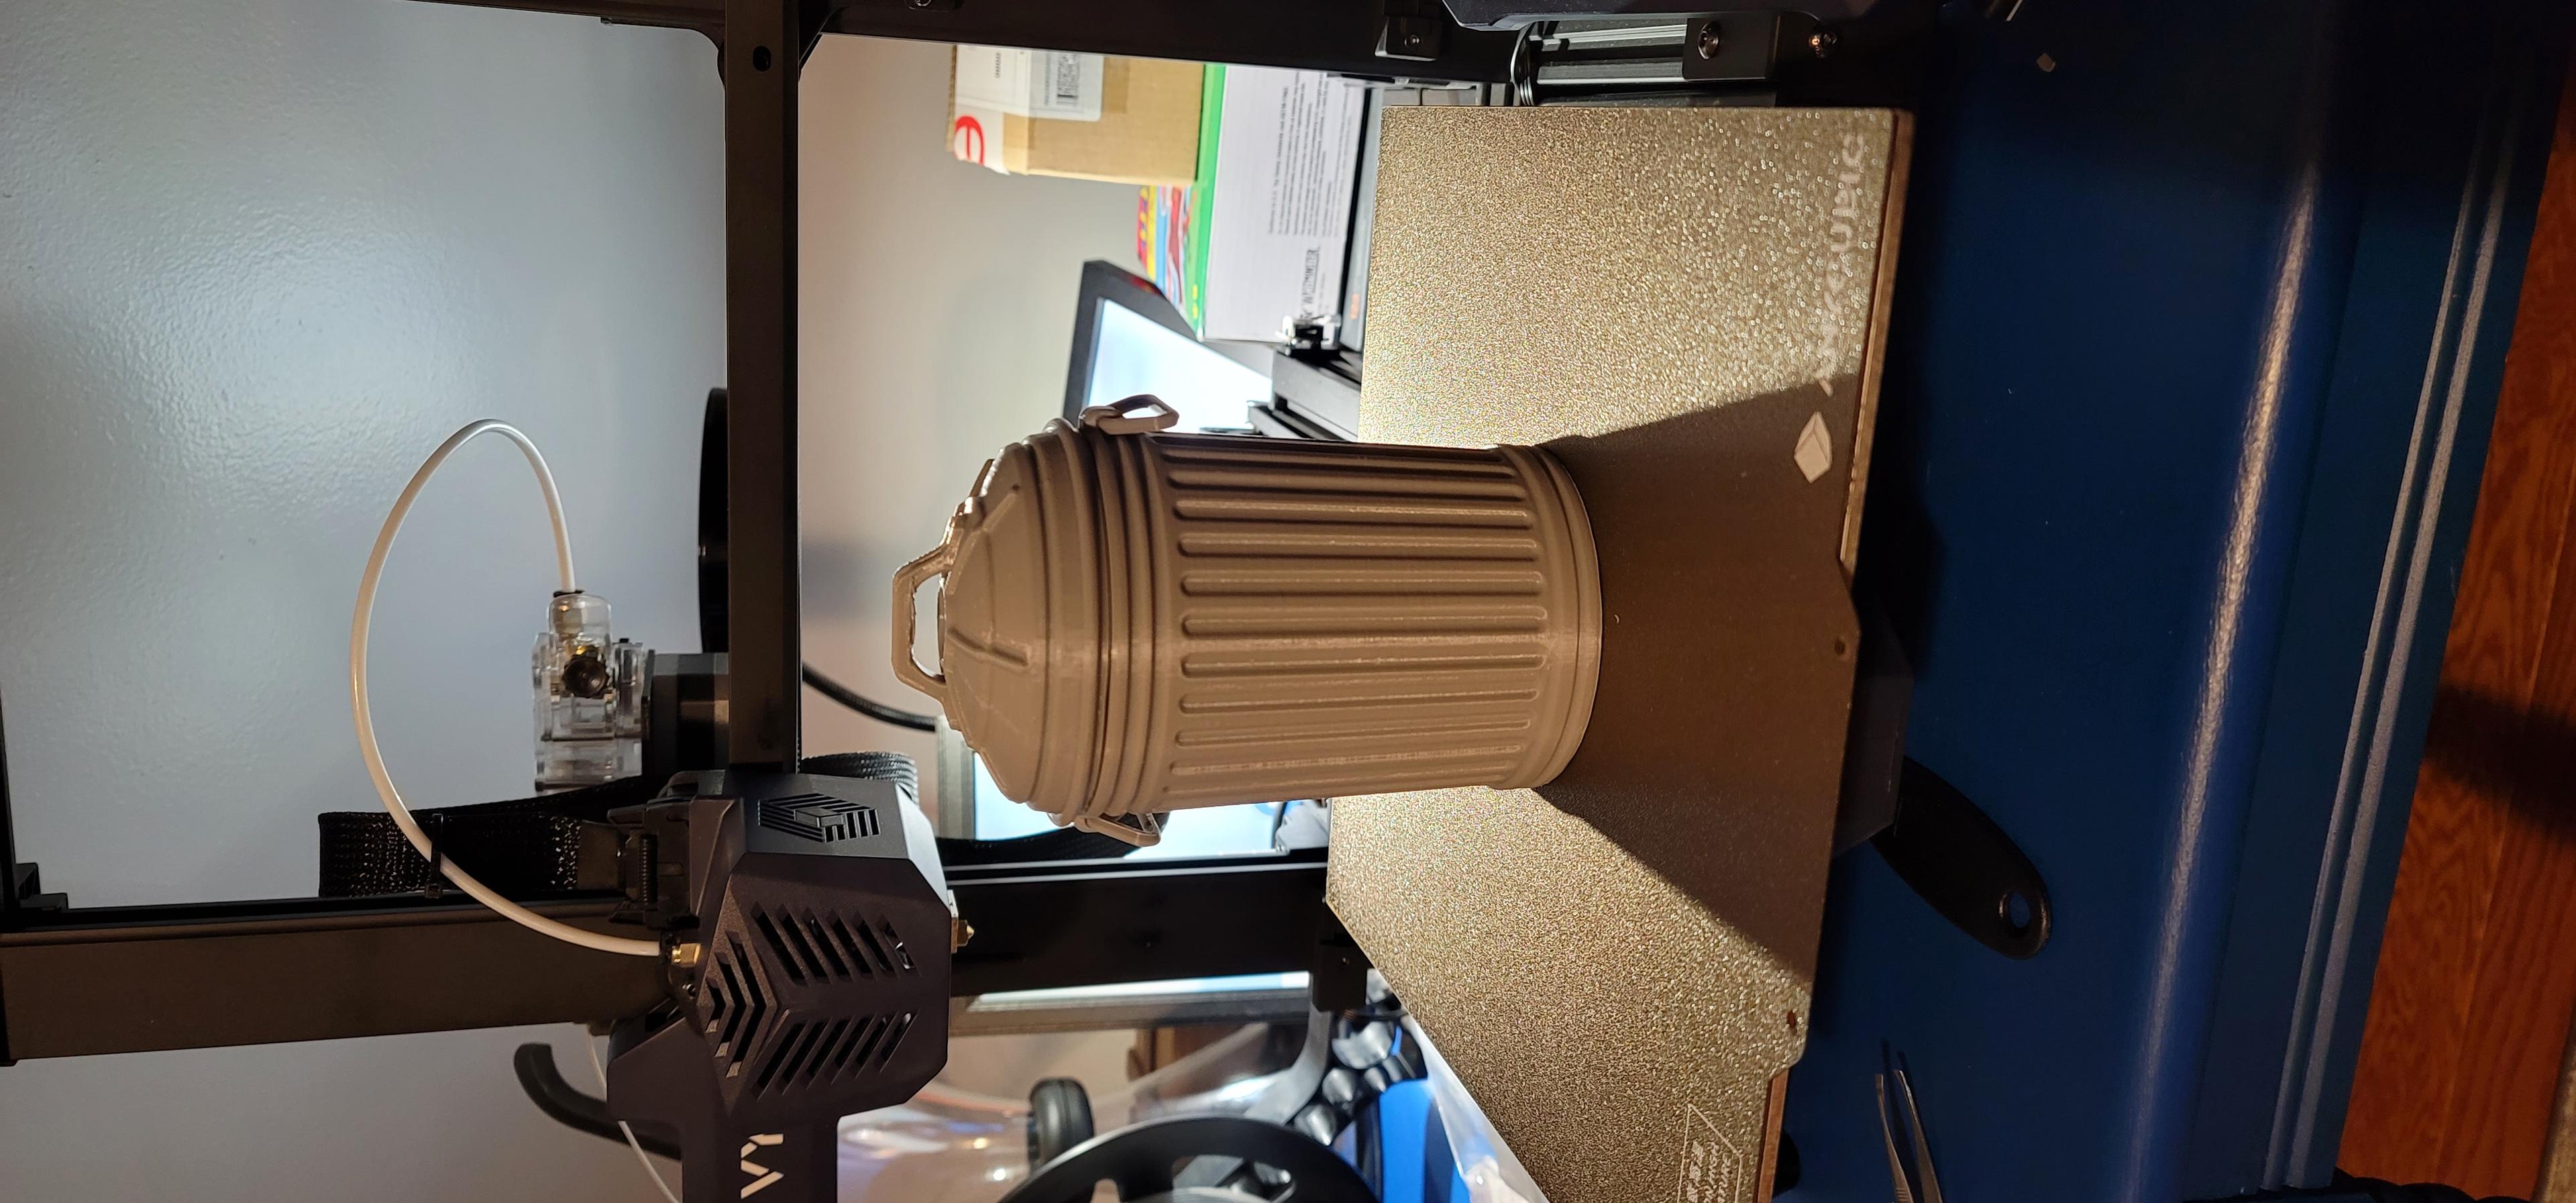 Metal Trash Can - 12oz Can Cup - Just got started with 3d printing. I only have the color gray at the moment. I have been following you on tic toc and when i saw this i had to print it. It came out great and it is the longest print so far that i have done. - 3d model